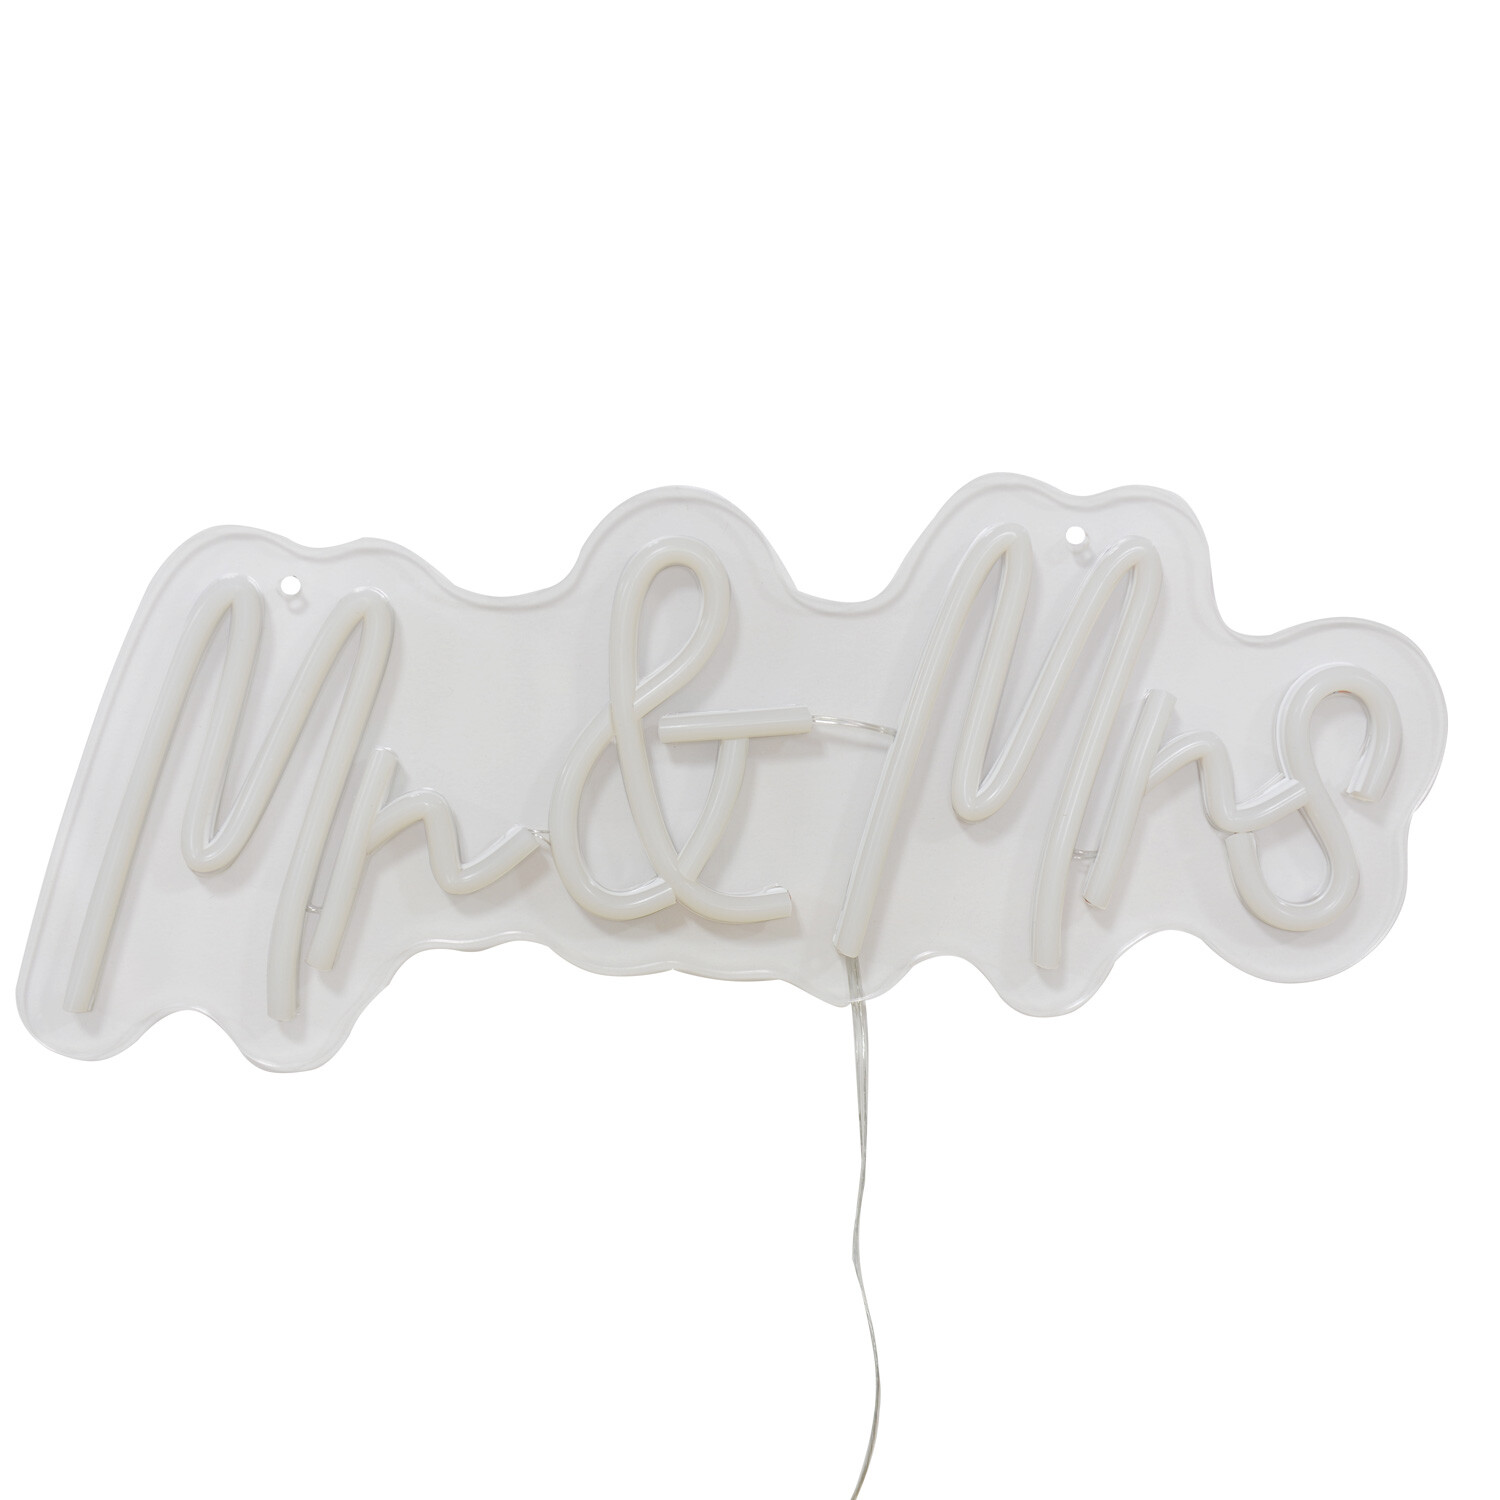 Mr and Mrs LED Neon Sign - White Image 2